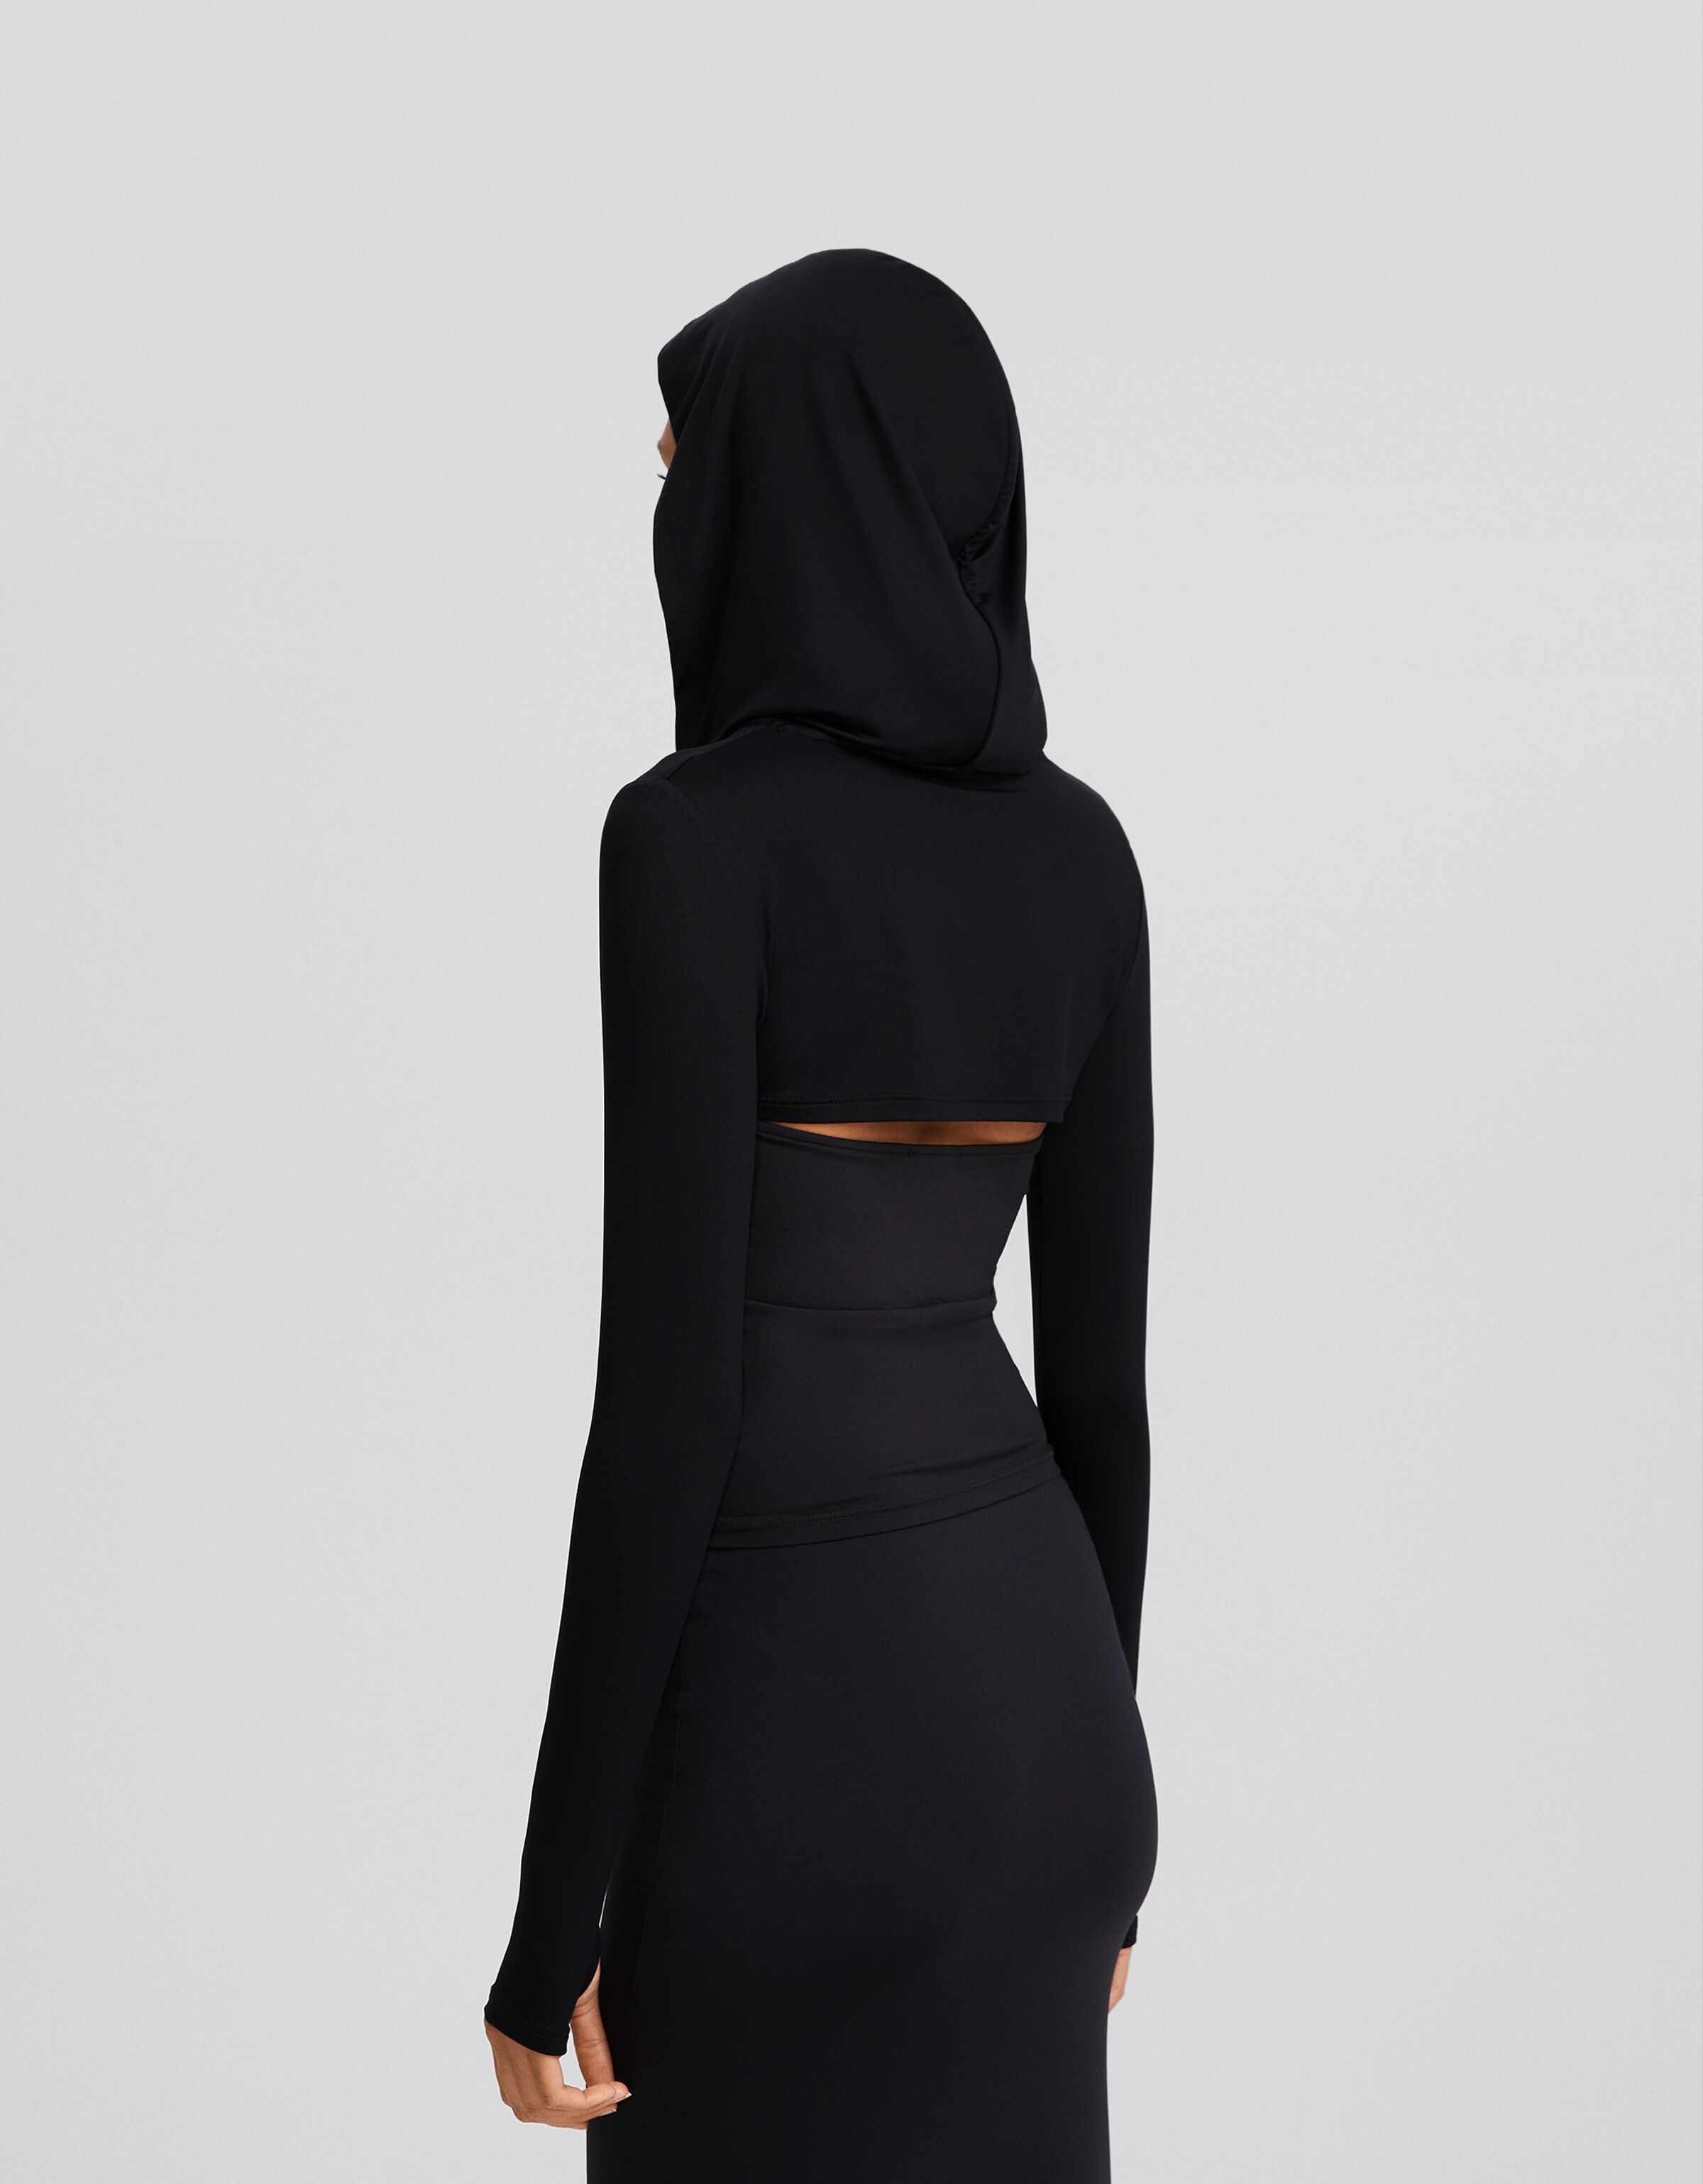 Long sleeve T-shirt with hood and arm warmers